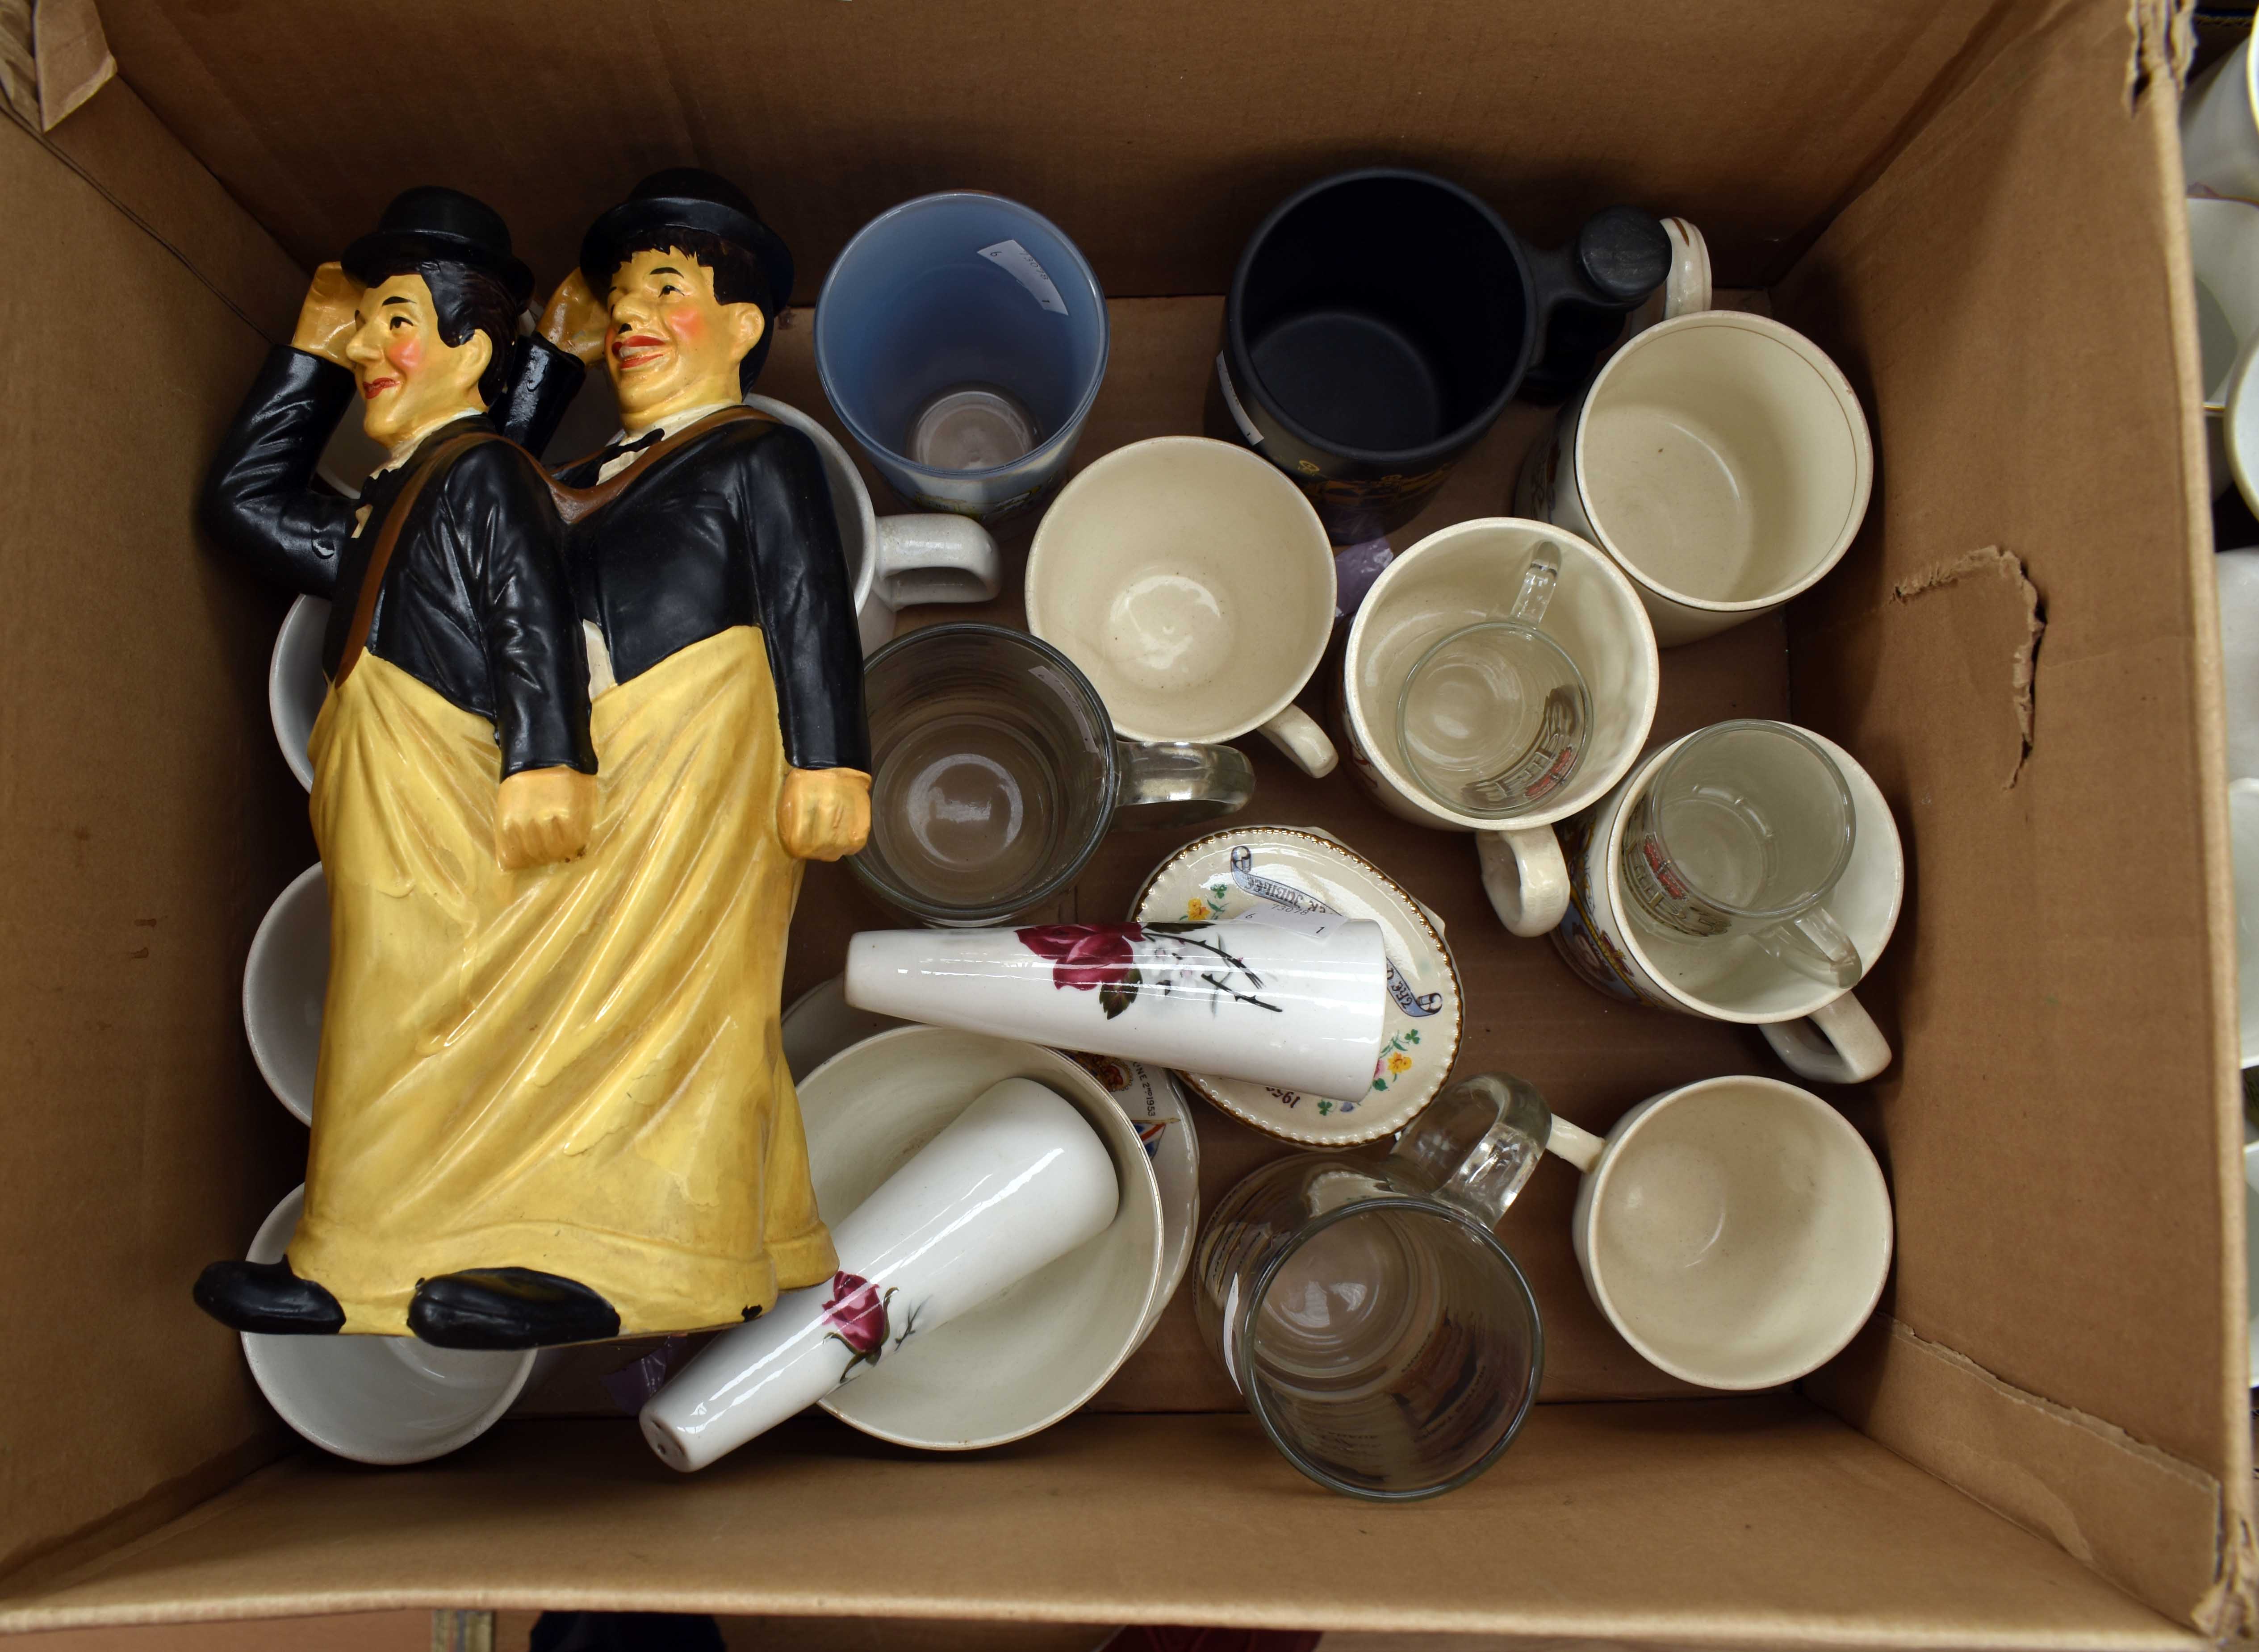 Laurel & Hardy figurine group together with Royal commemorative ceramics